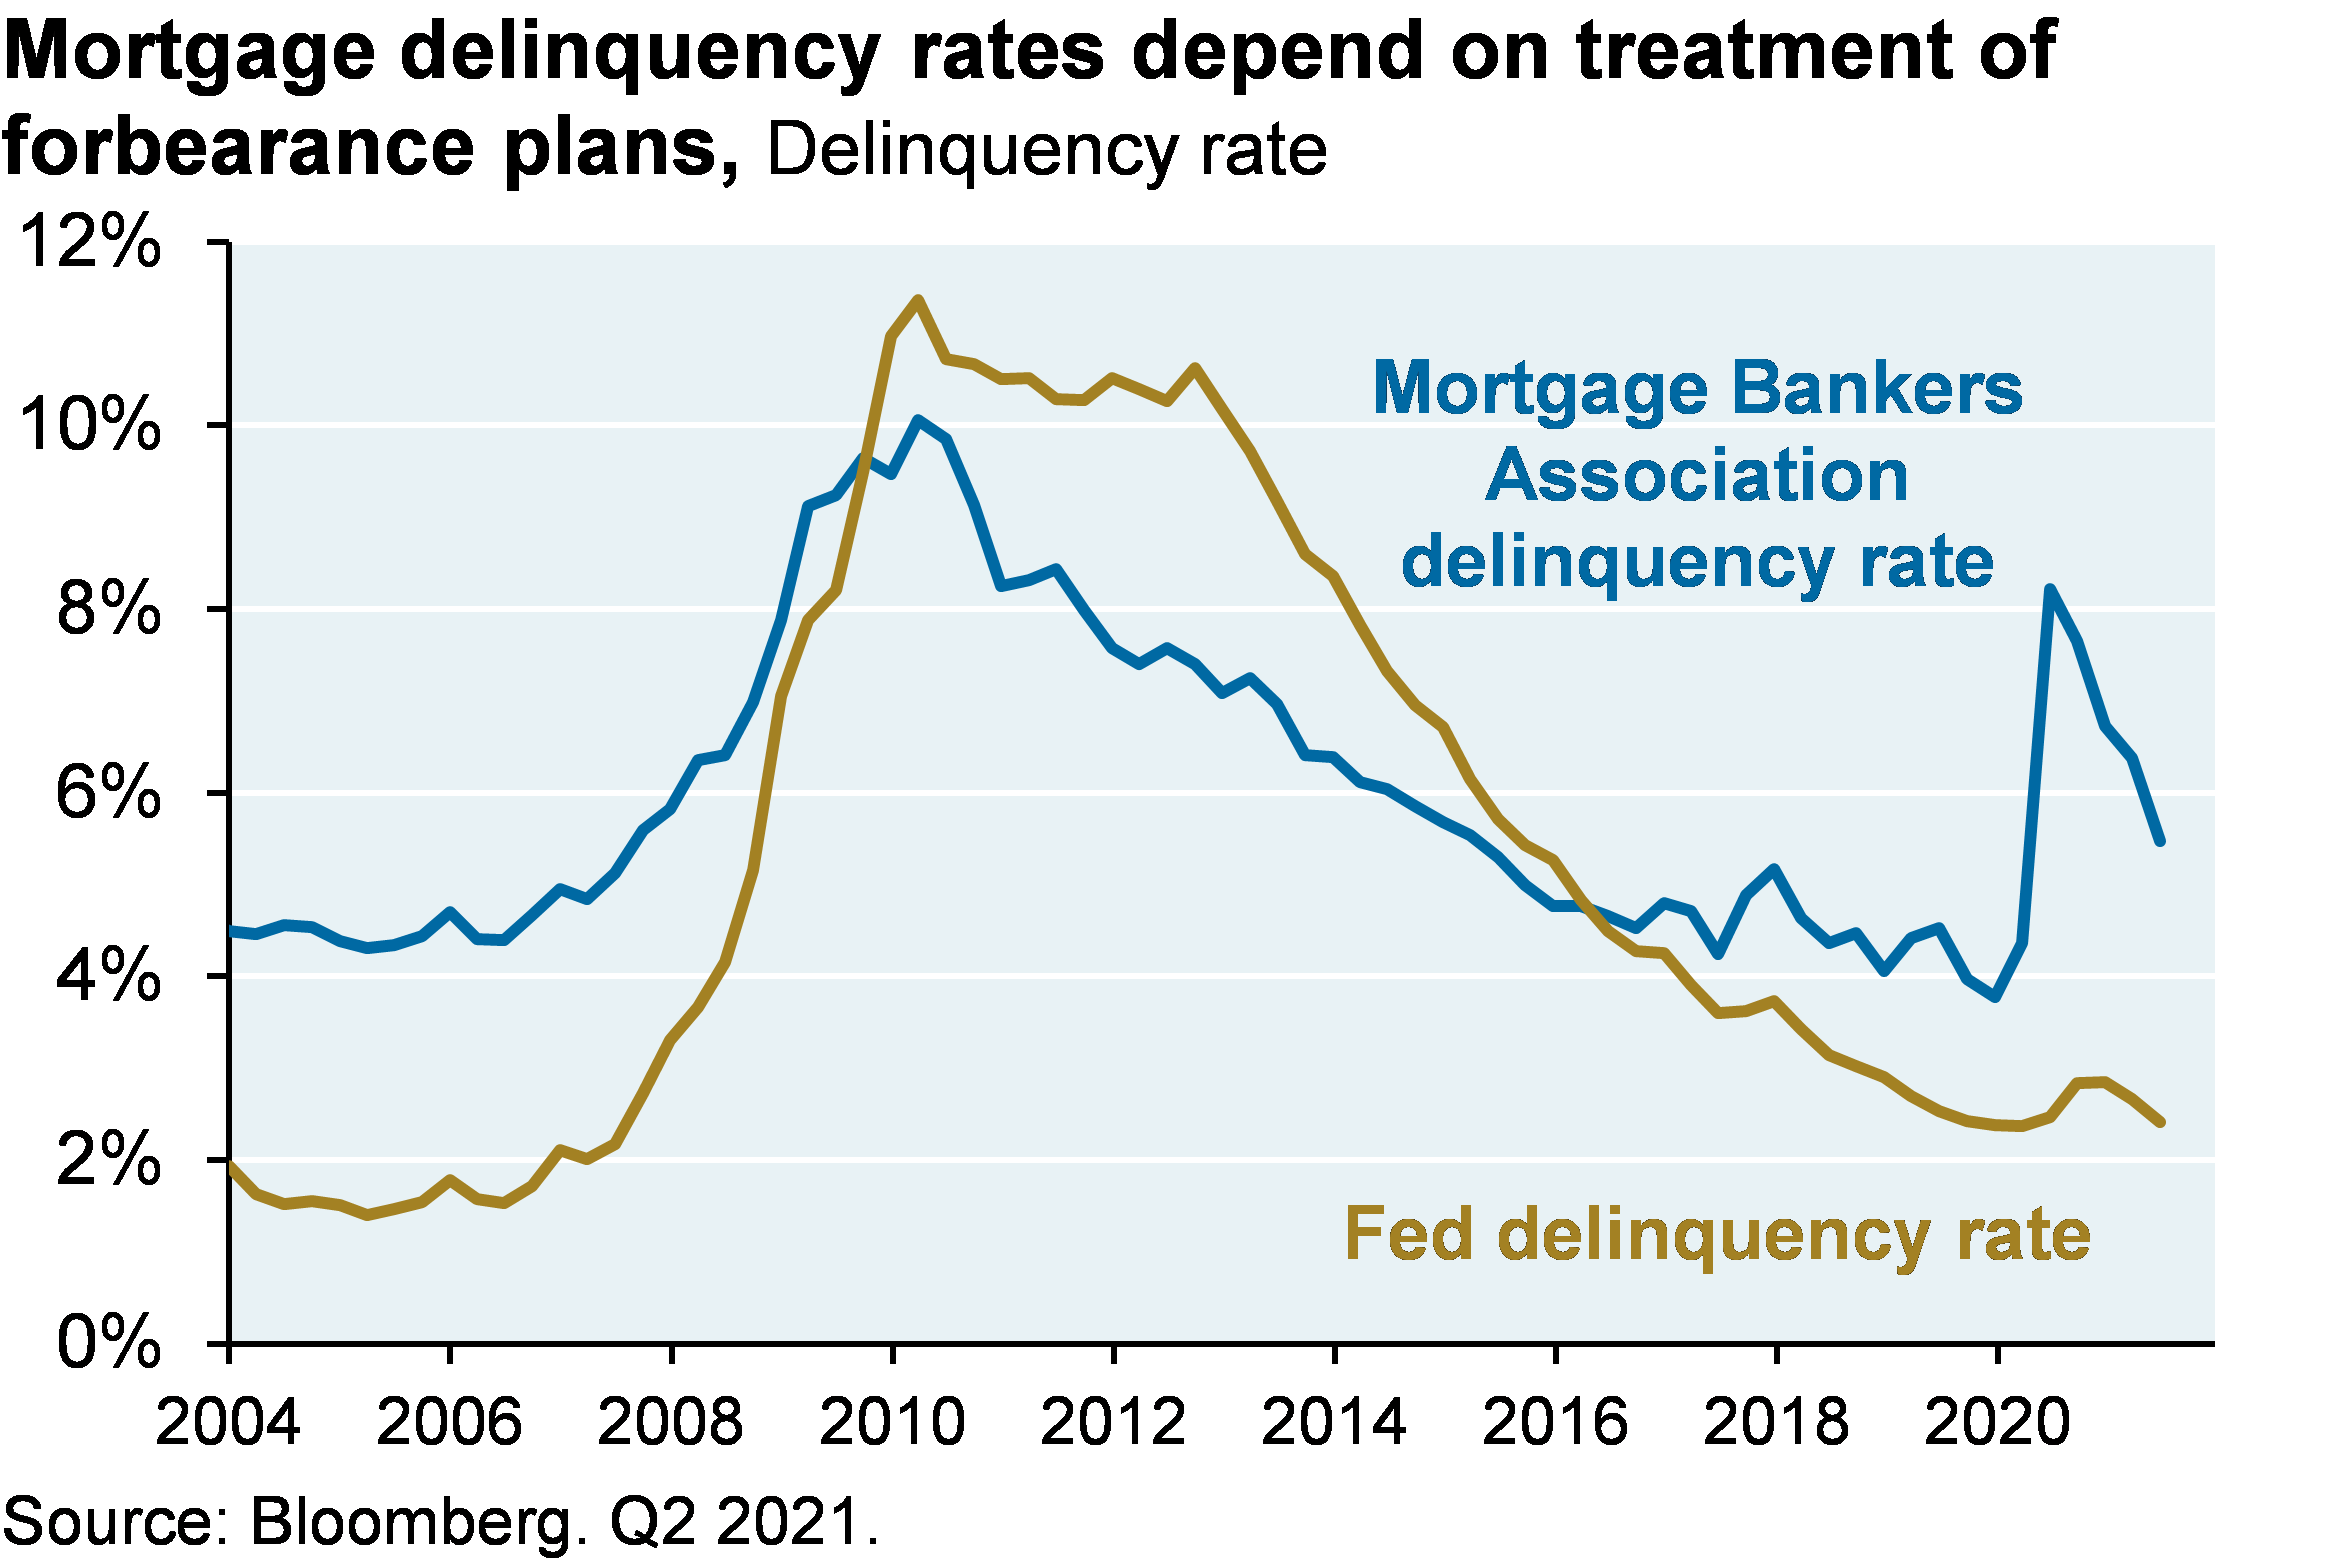 Line chart shows the gap between the Mortgage Bankers Association delinquency rate and the Fed delinquency rate. The MBA defines people deferring payments as delinquent whereas the Fed definition does not.